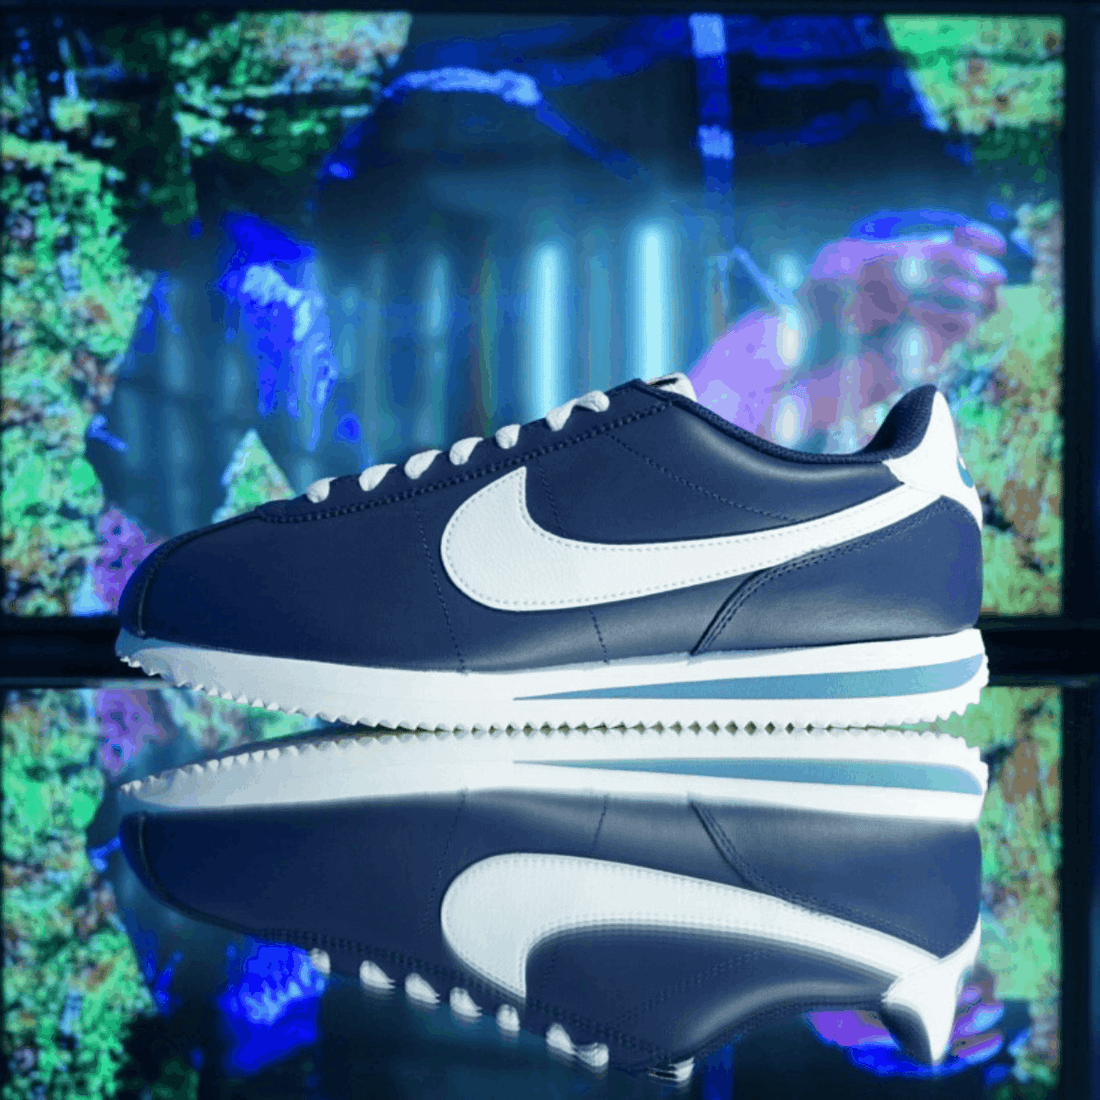 NIKE CORTEZ - NEW DELIVERY